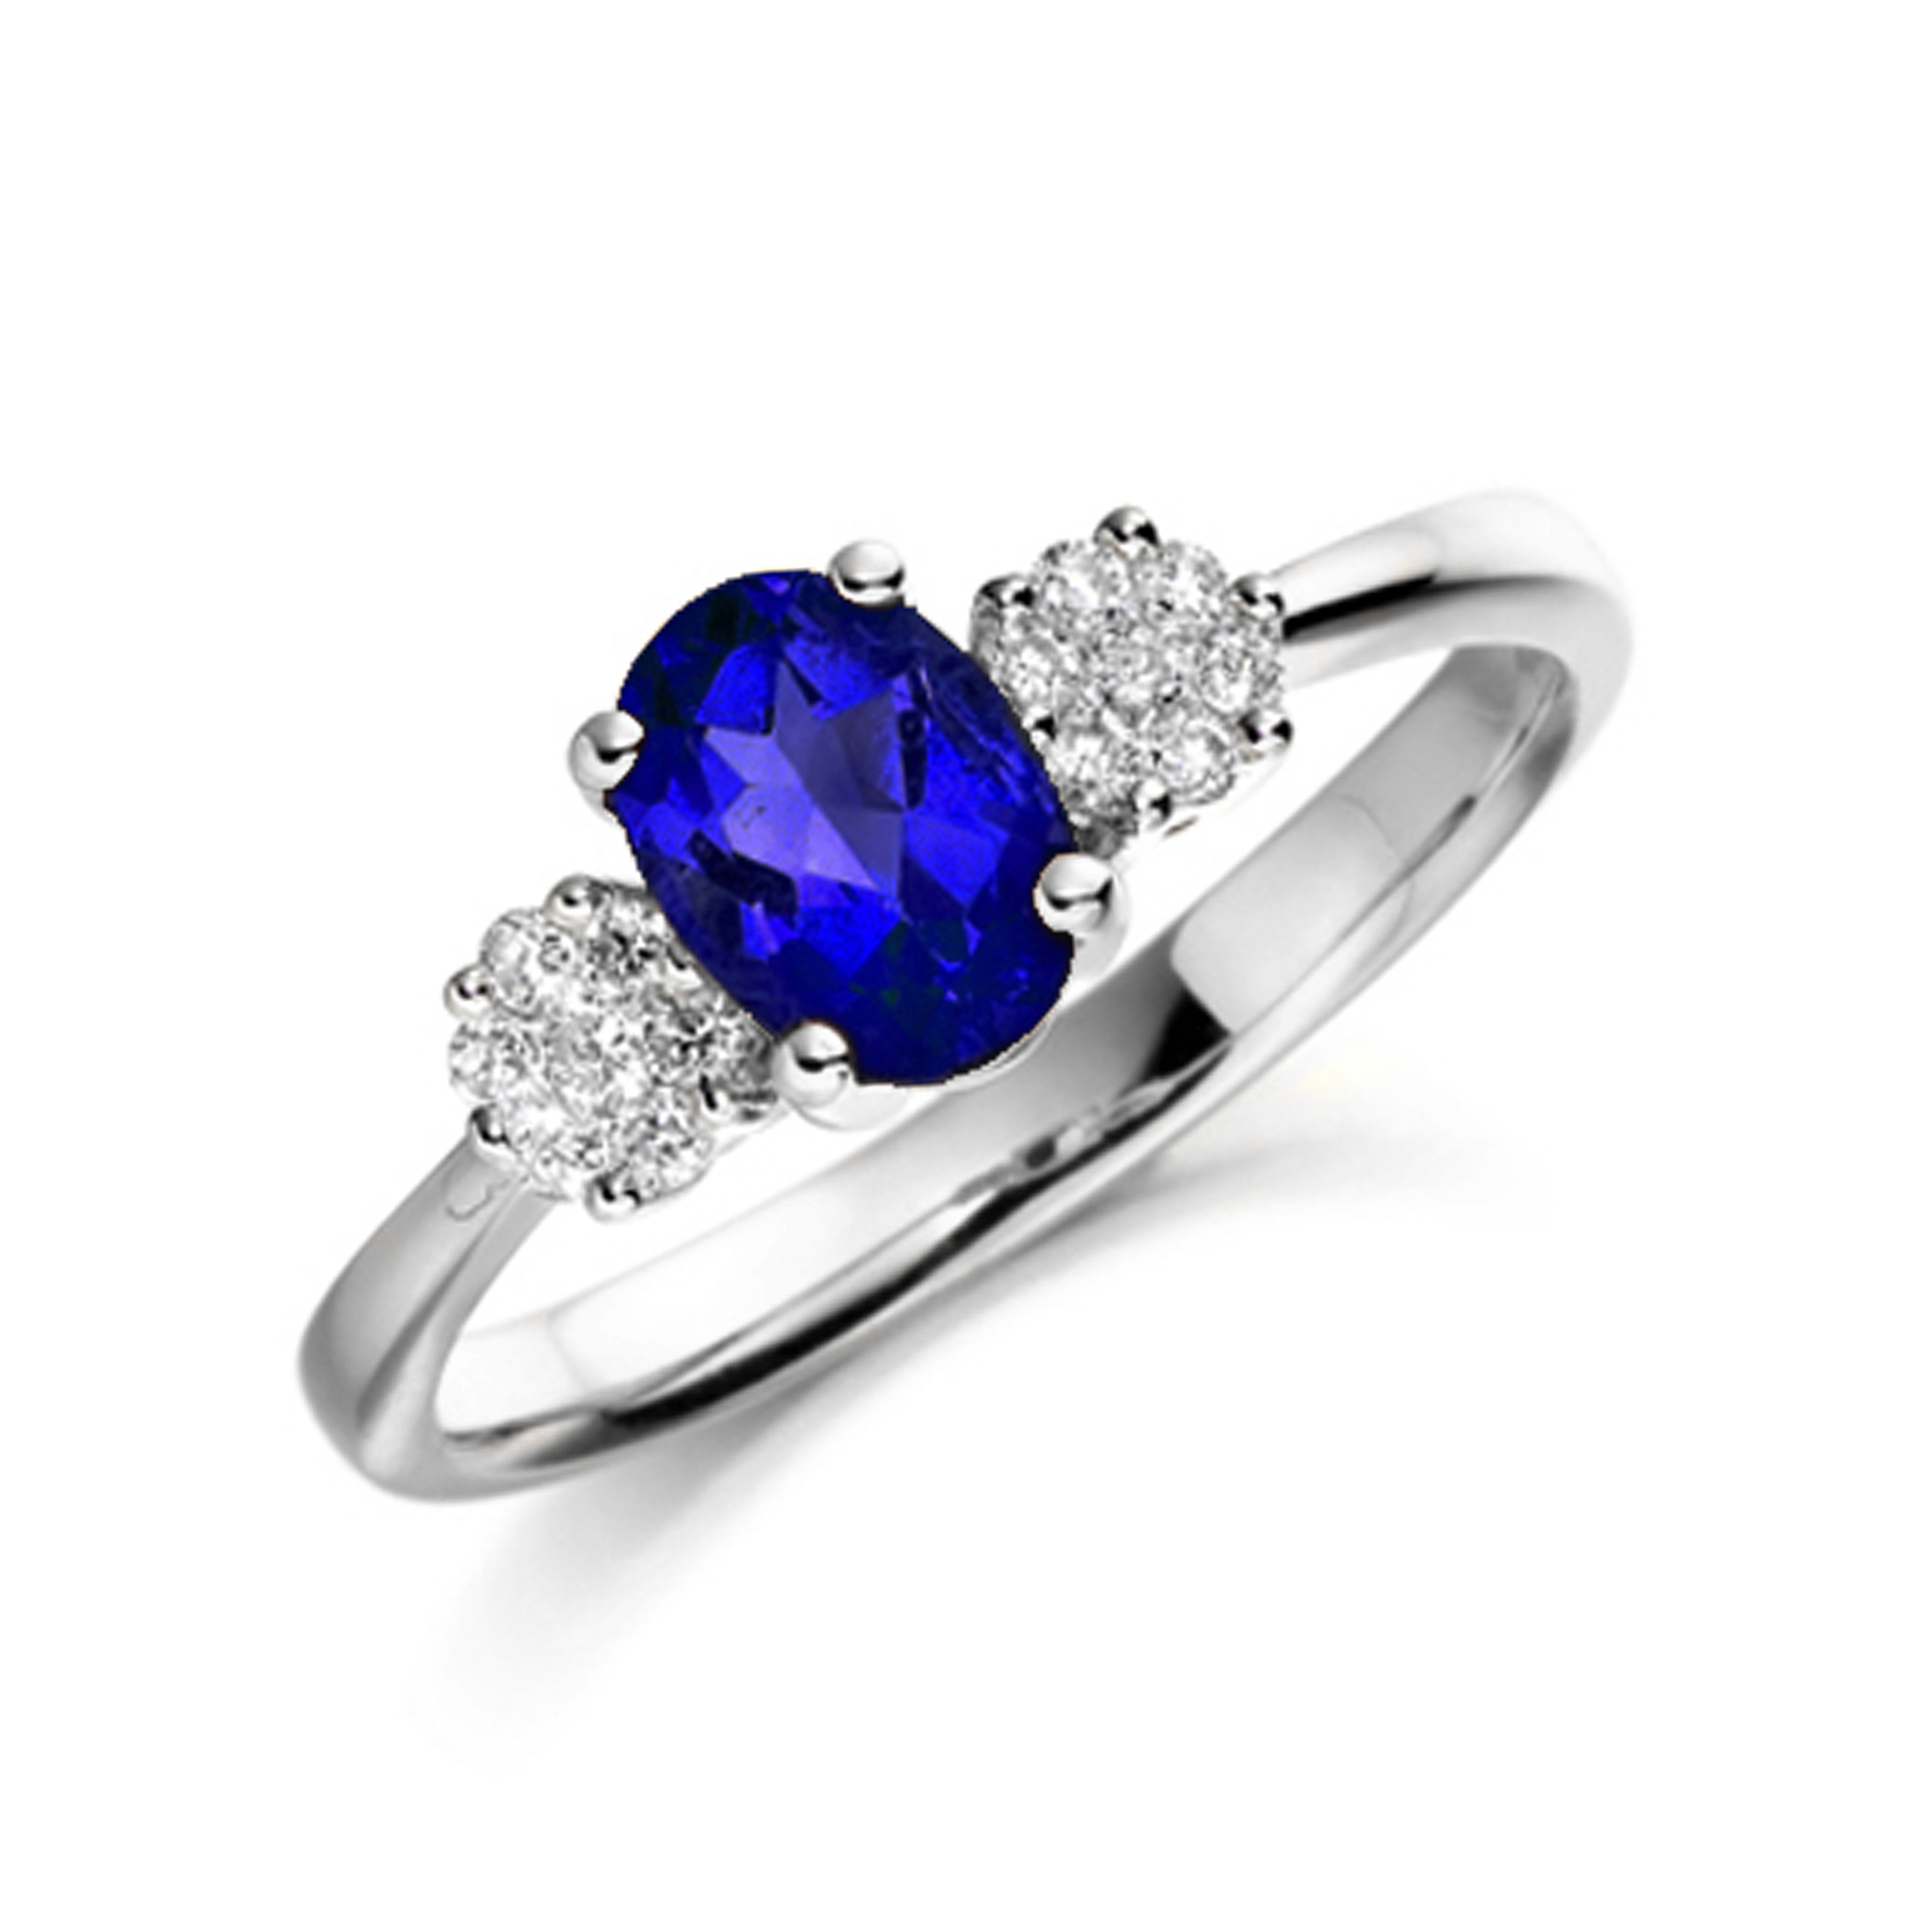 7X5mm Oval Blue Sapphire Side Stone Diamond And Gemstone Engagement Ring